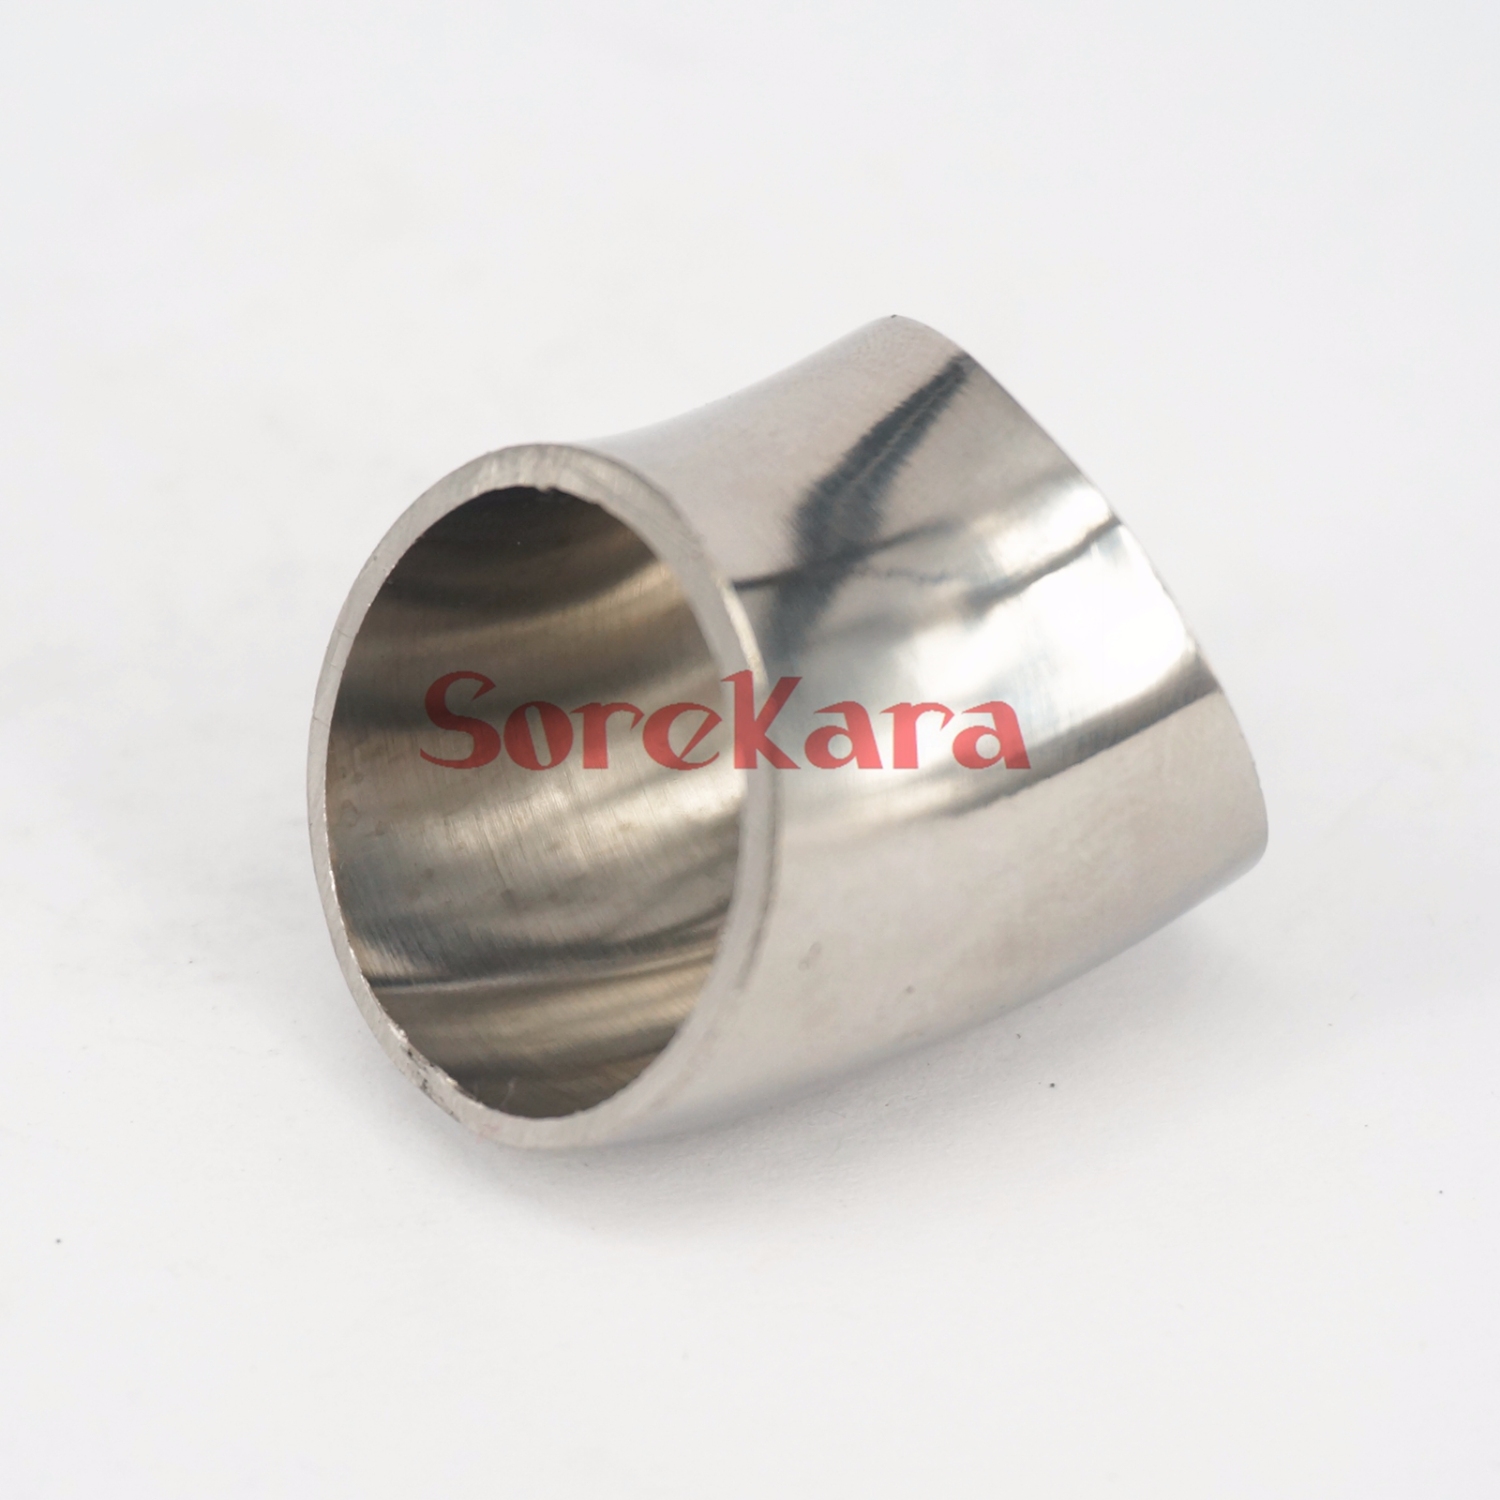 28mm 304 Stainless Steel Sanitary Weld 45 Degree Elbow Pipe Fitting Homebrew